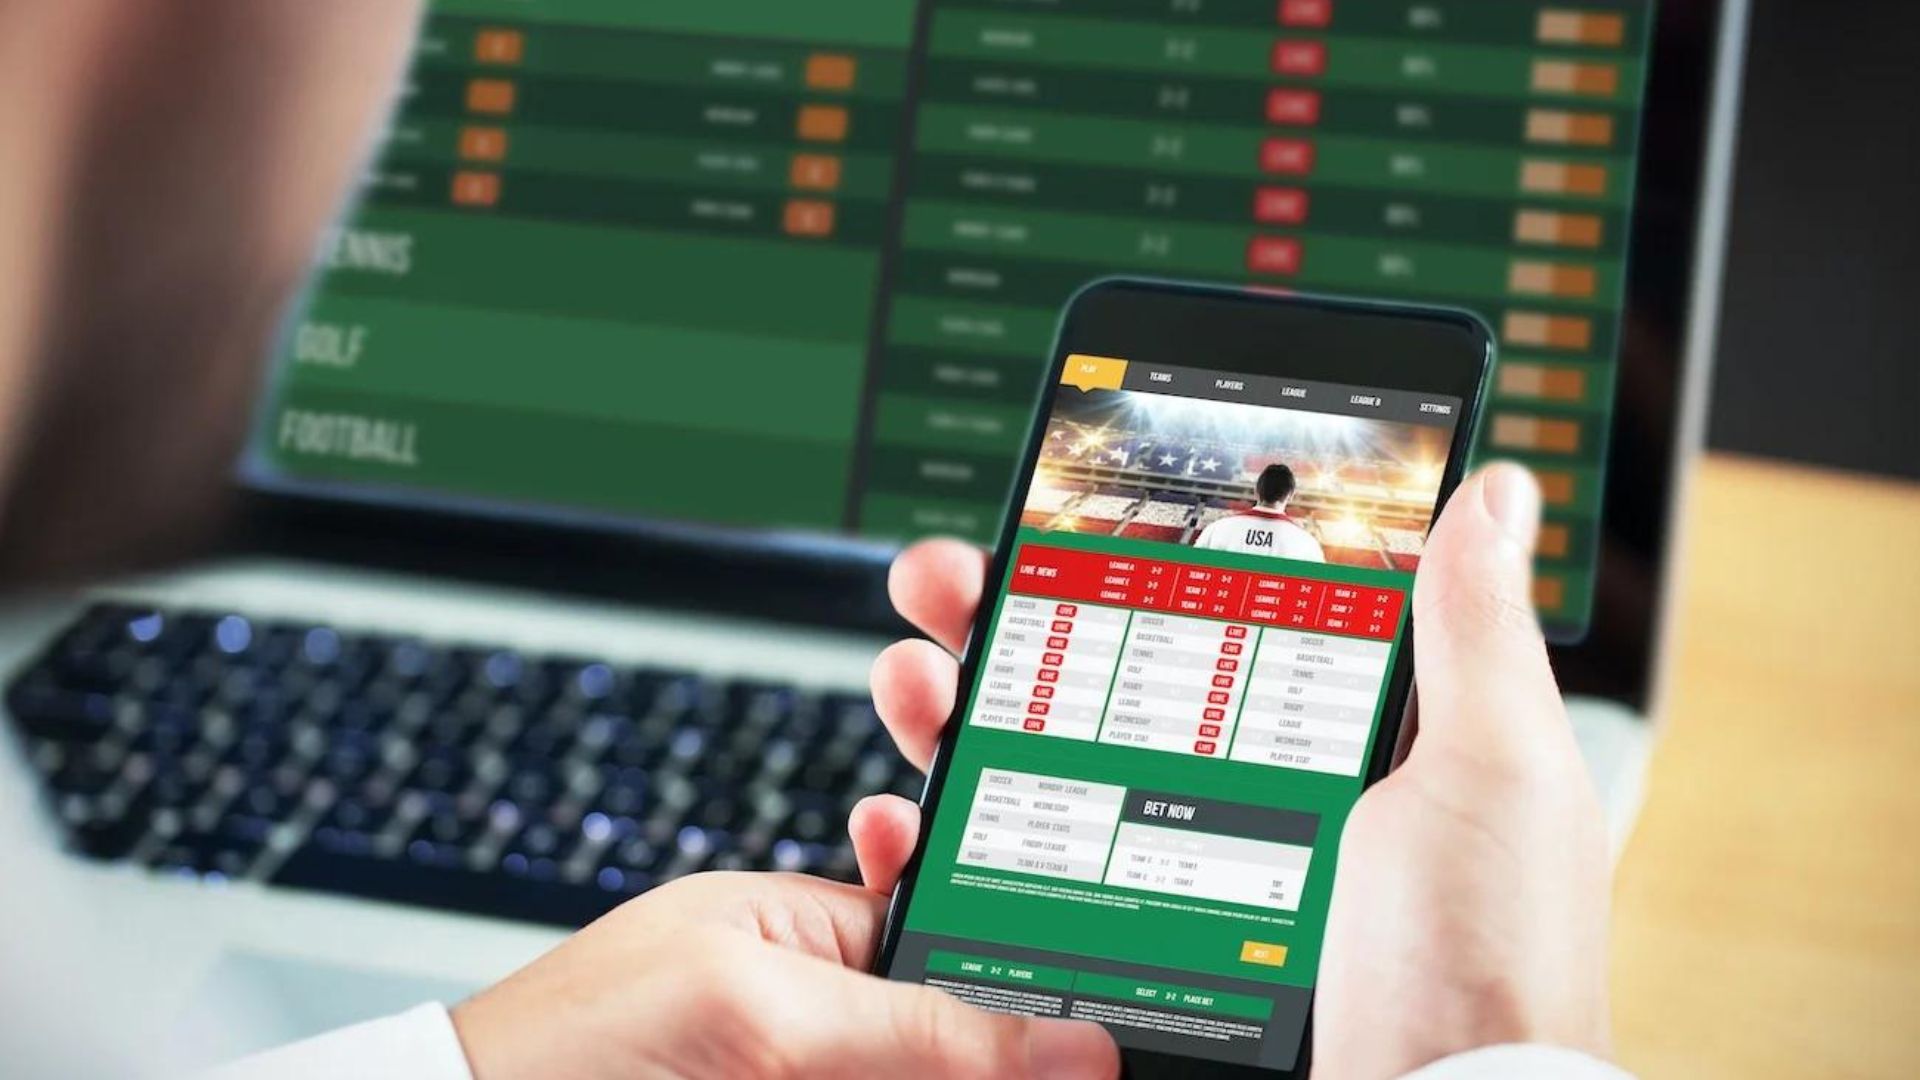 a person who is football betting on smartphone, laptop on the desk with betting odds